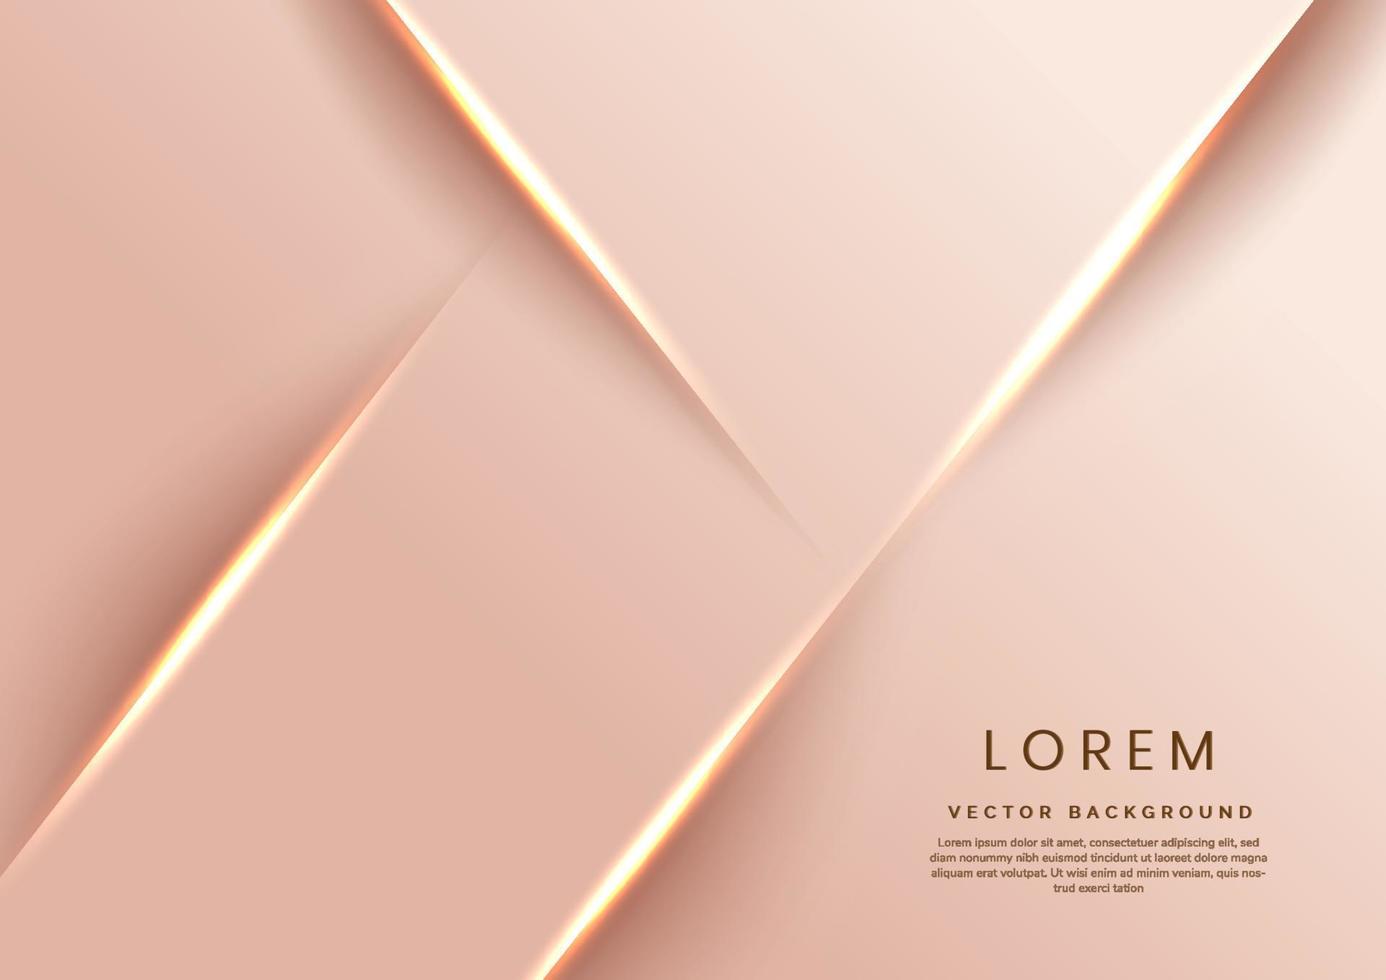 Abstract 3d template rose gold background with gold lines diagonal sparking with copy space for text. Luxury style. vector